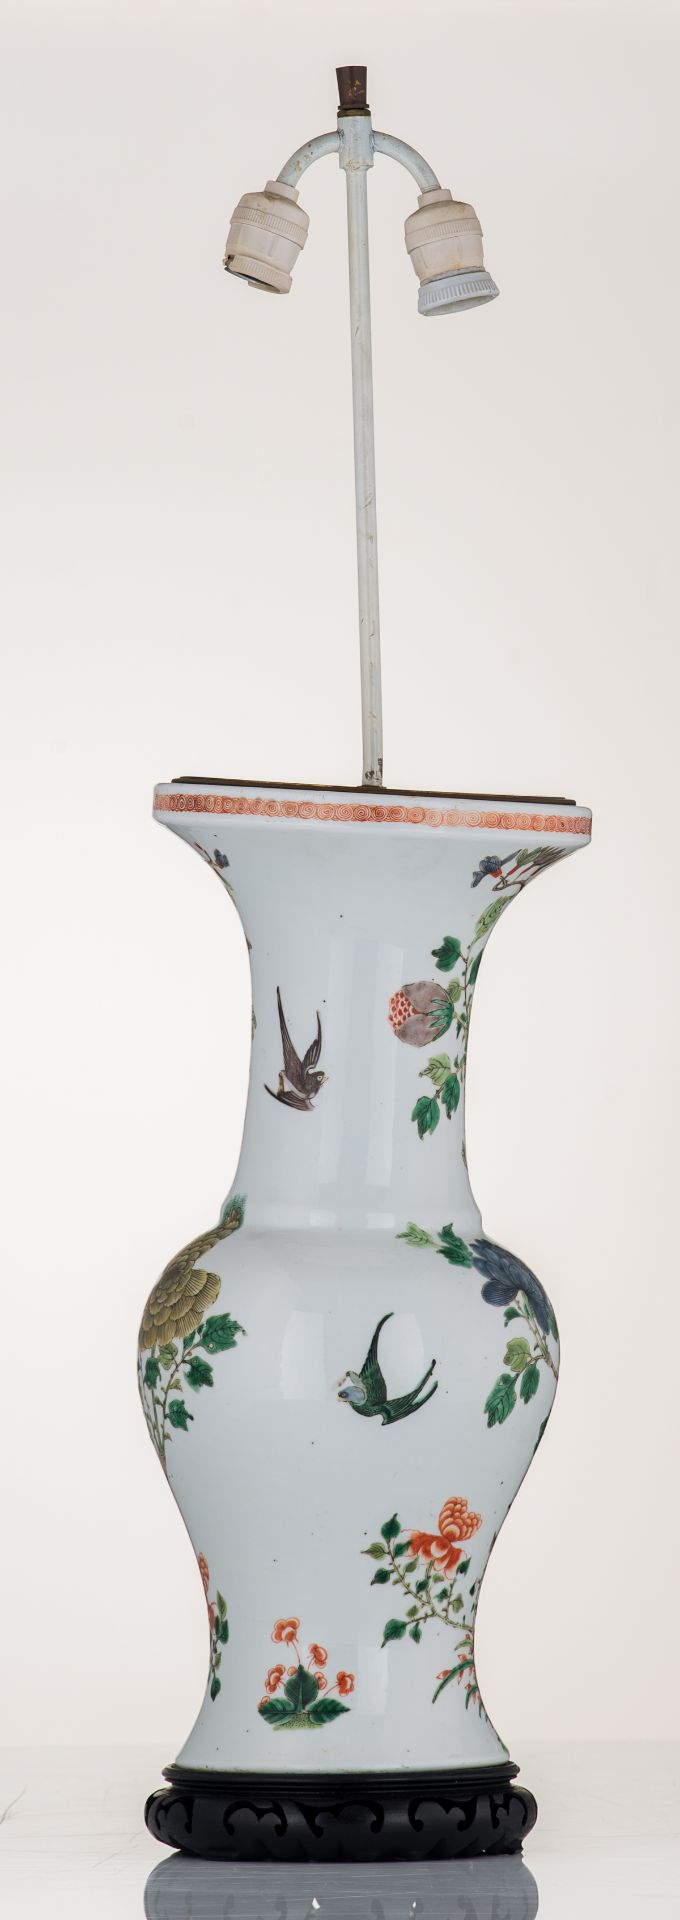 A Chinese famille verte vase, decorated with birds and a flower branch, 19thC, H 49 (with stand) - 8 - Image 3 of 6